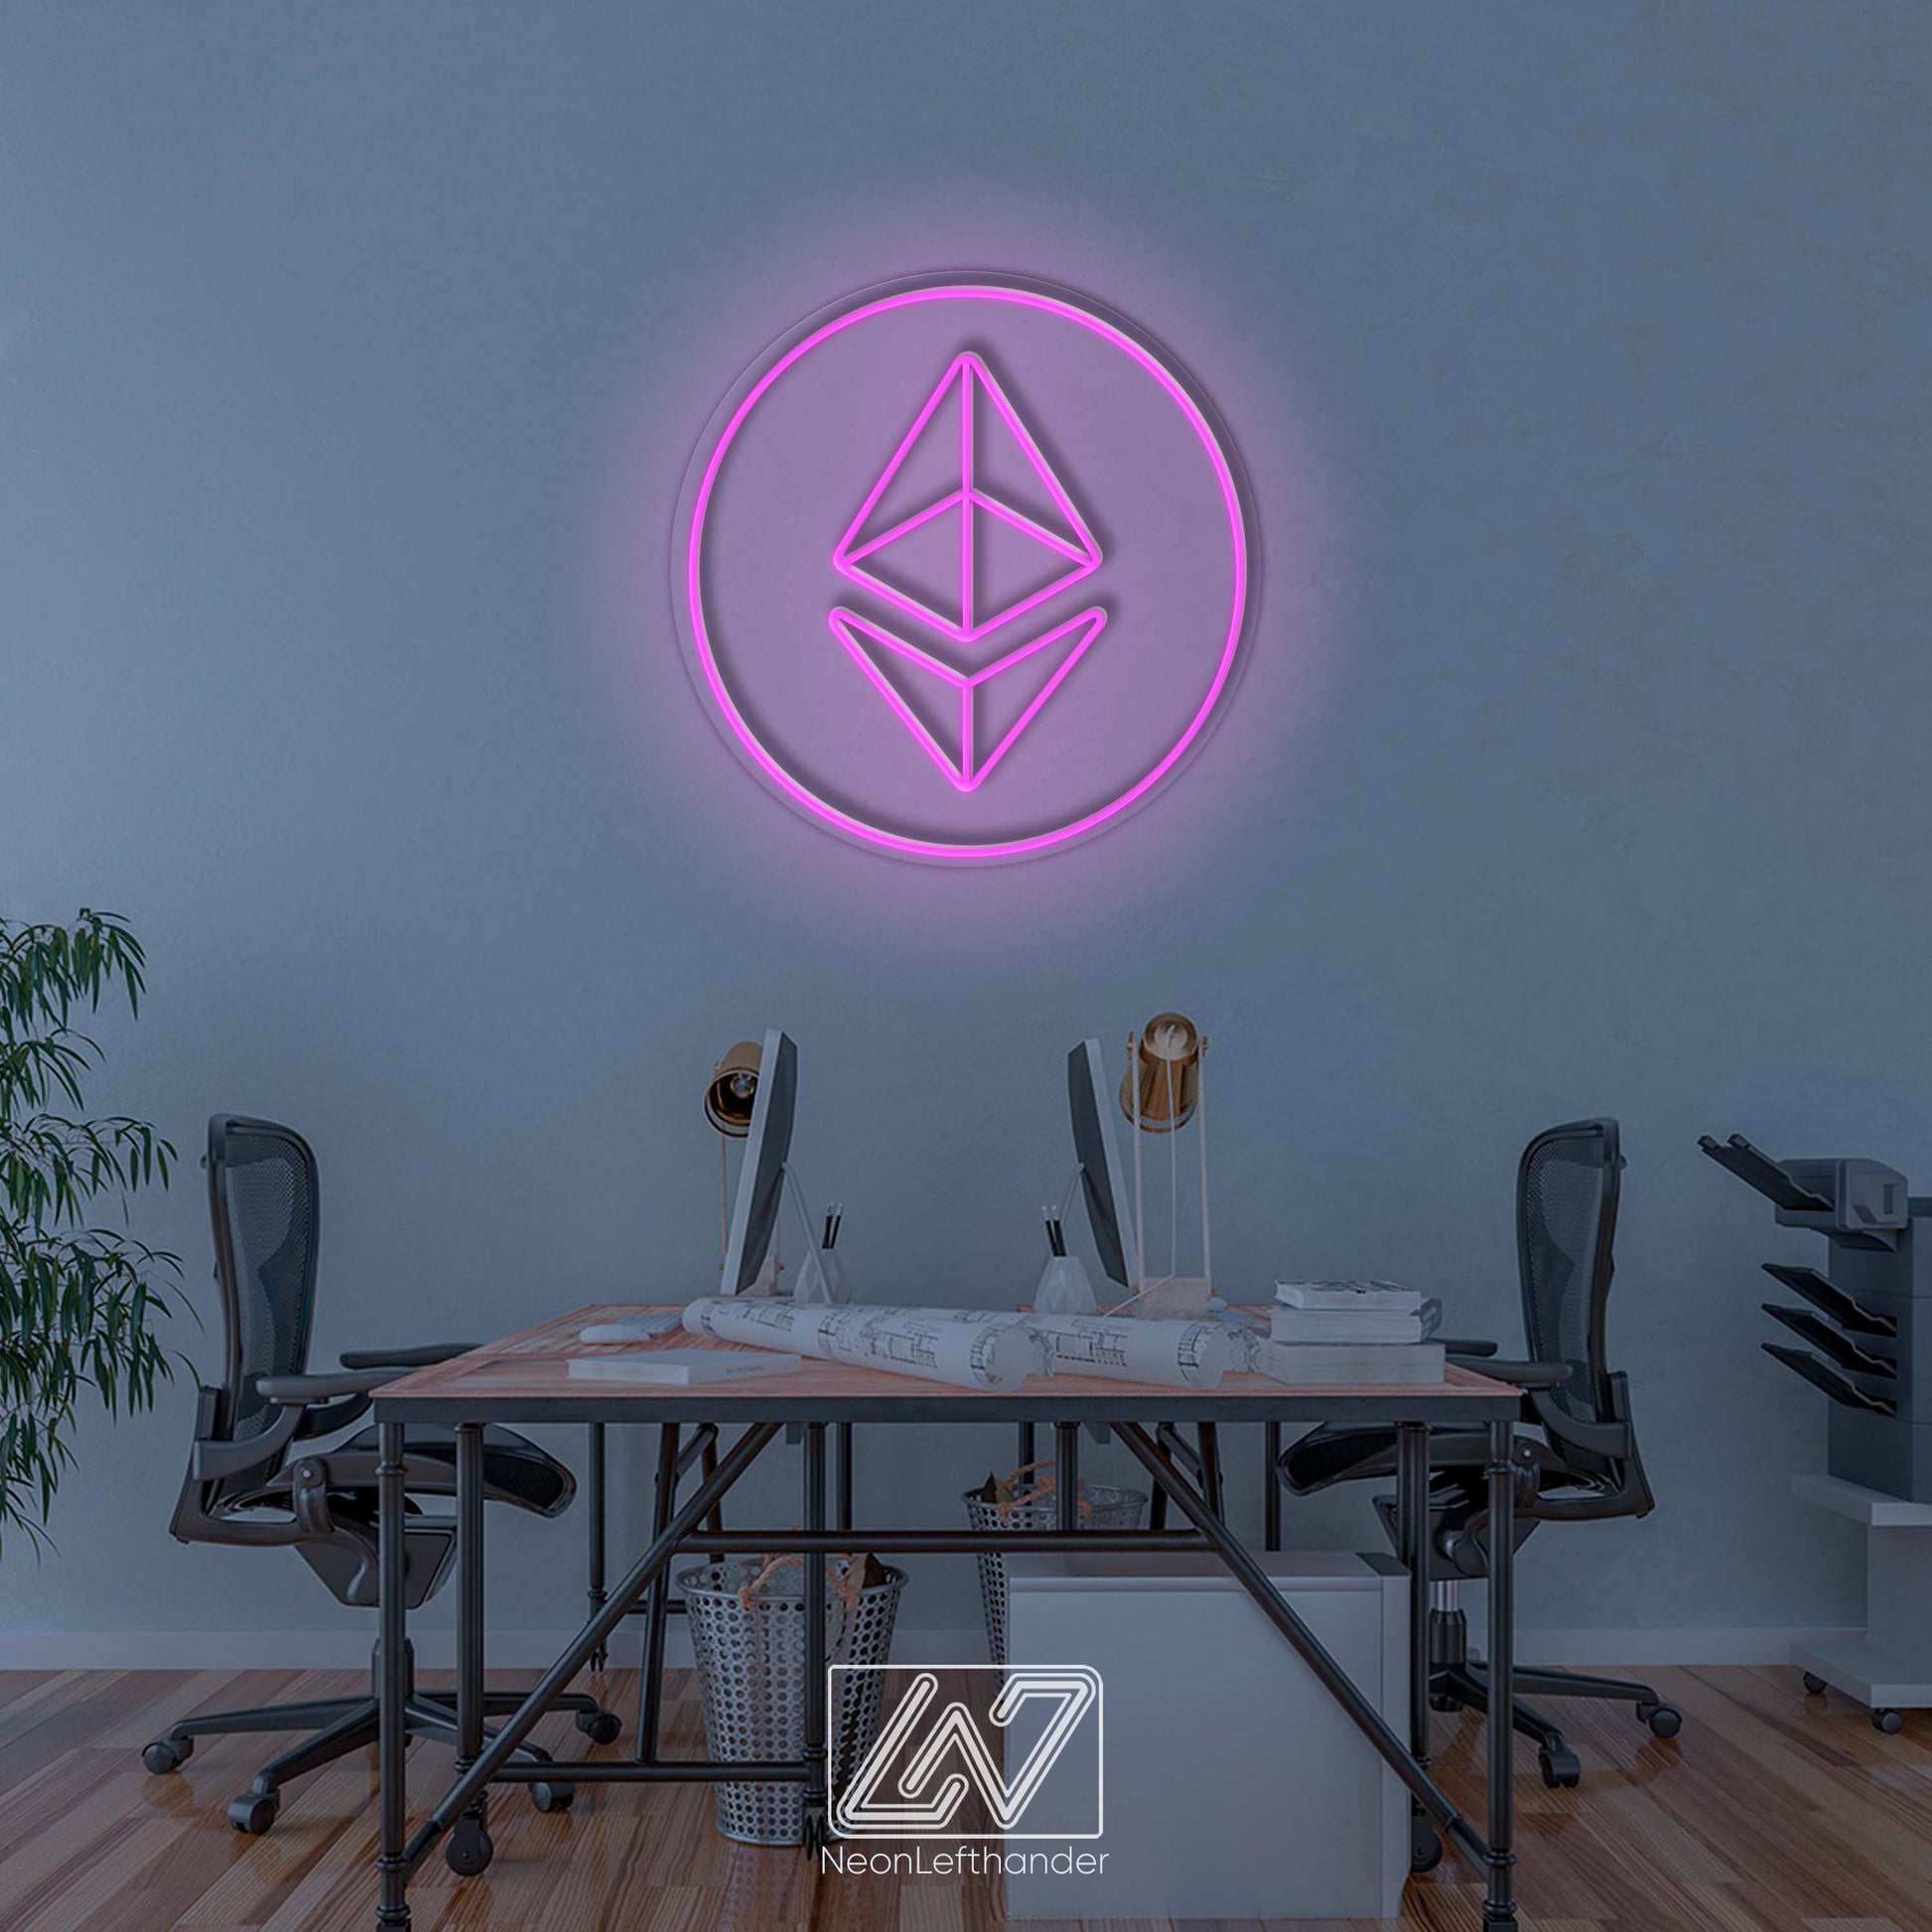 Ethereum - LED Neon Sign, Bedroom Neon Sign, Crypto Neon Sign, Neon Lights, LED Neon Ethereum Logo for Devotees – Illuminate the Crypto Path